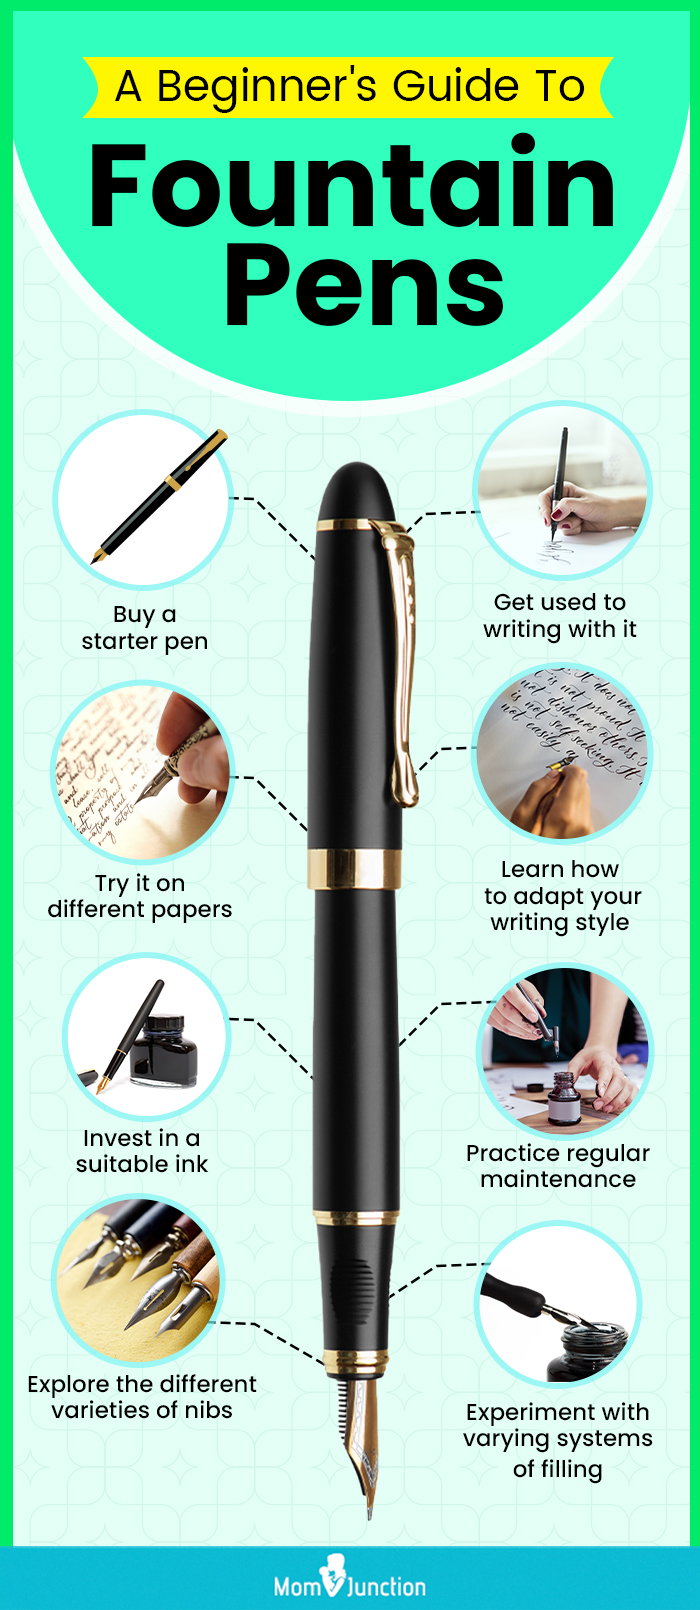 A-Beginner's-Guide-To-Fountain-Pens (infographic)